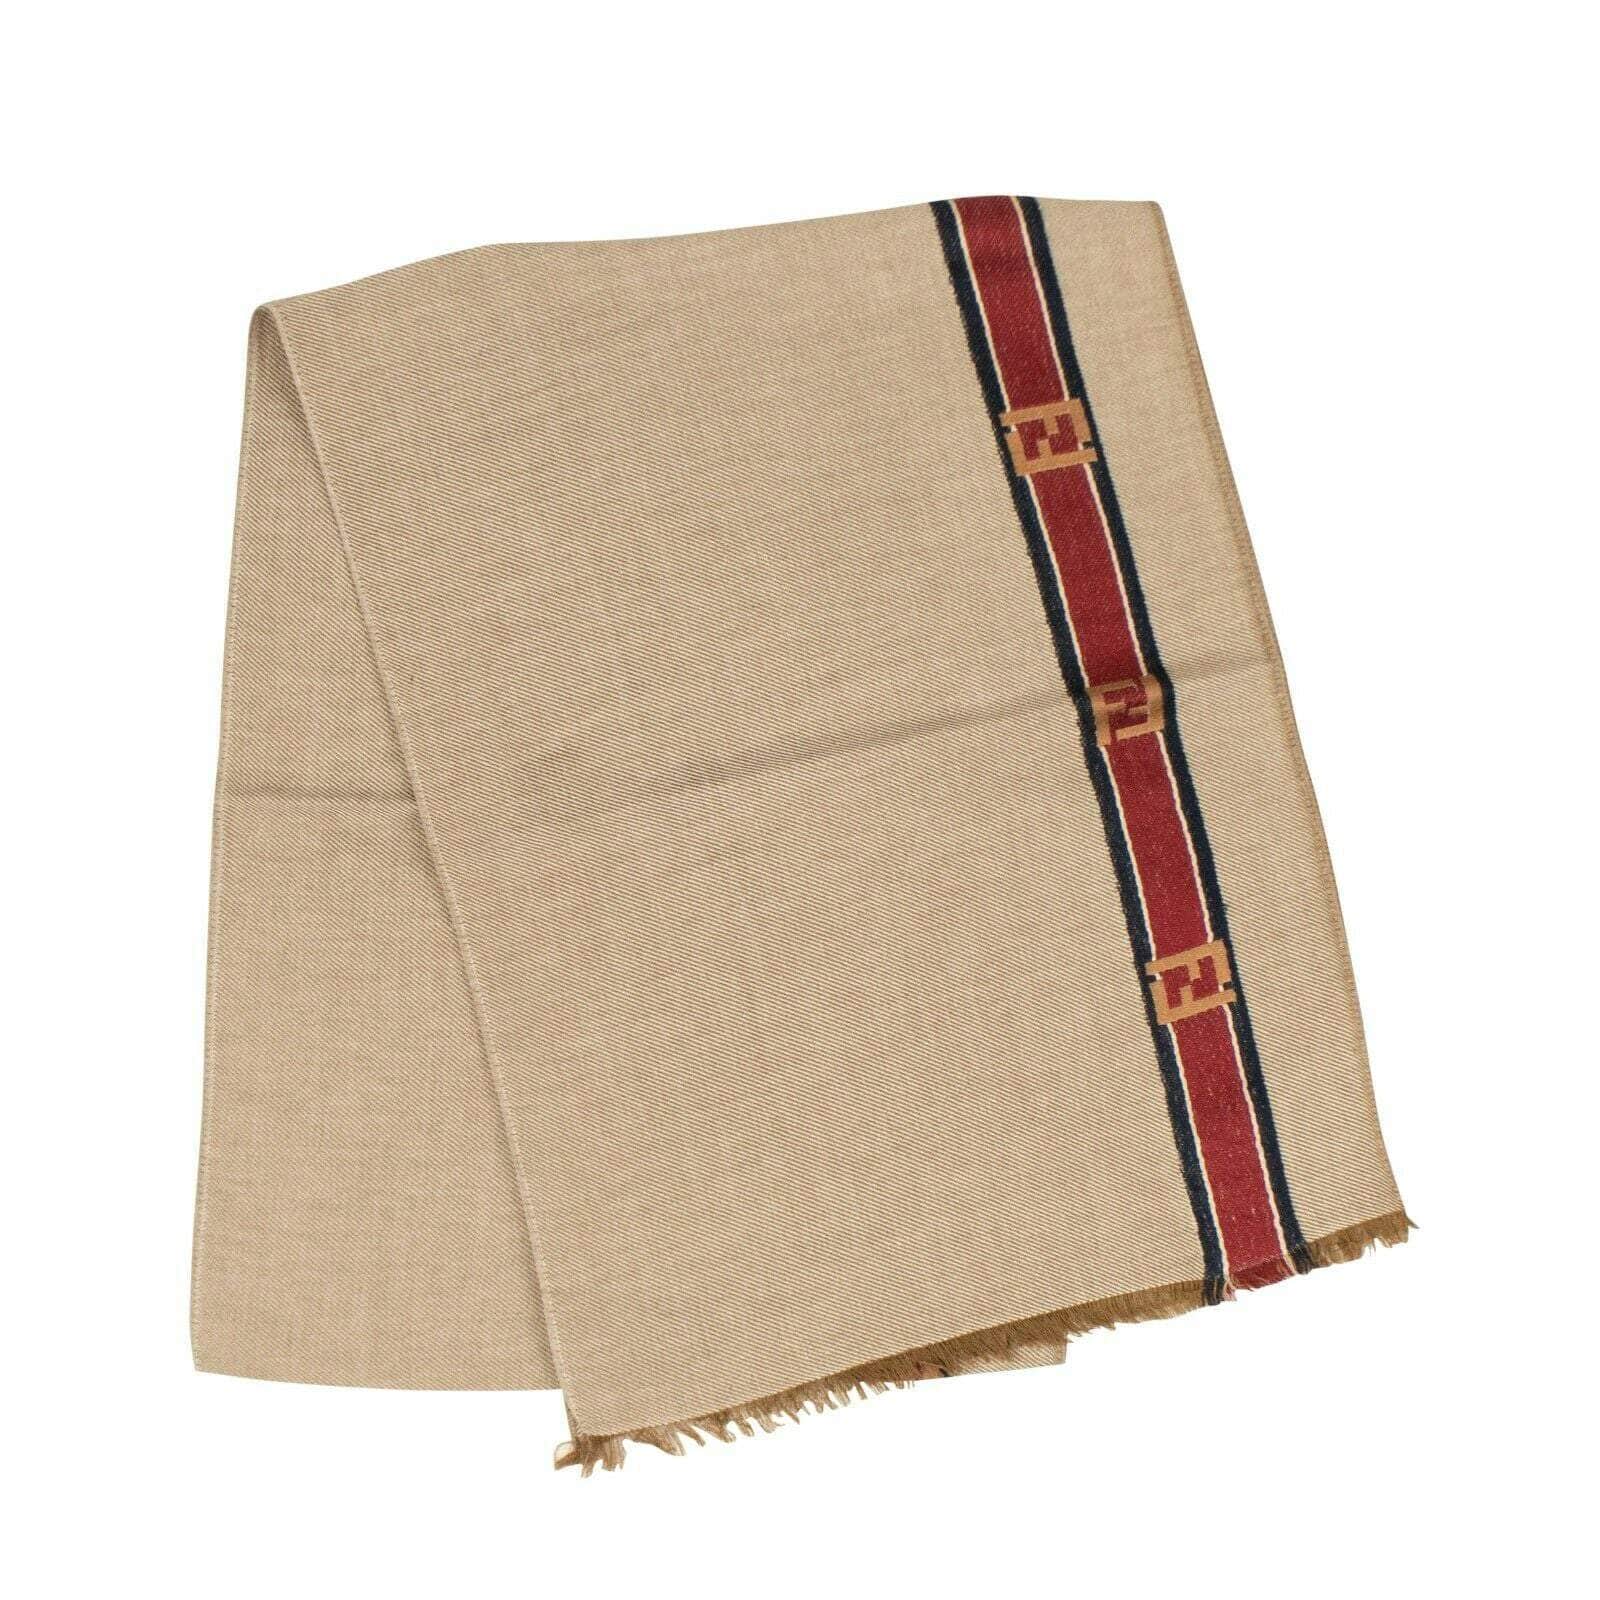 Fendi 500-750, couponcollection, fendi, gender-womens, main-accessories, Scarf, womens-aaccessories Cotton/Silk 'Logo Stripe' Scarf - Camel 75LE-1538 75LE-1538